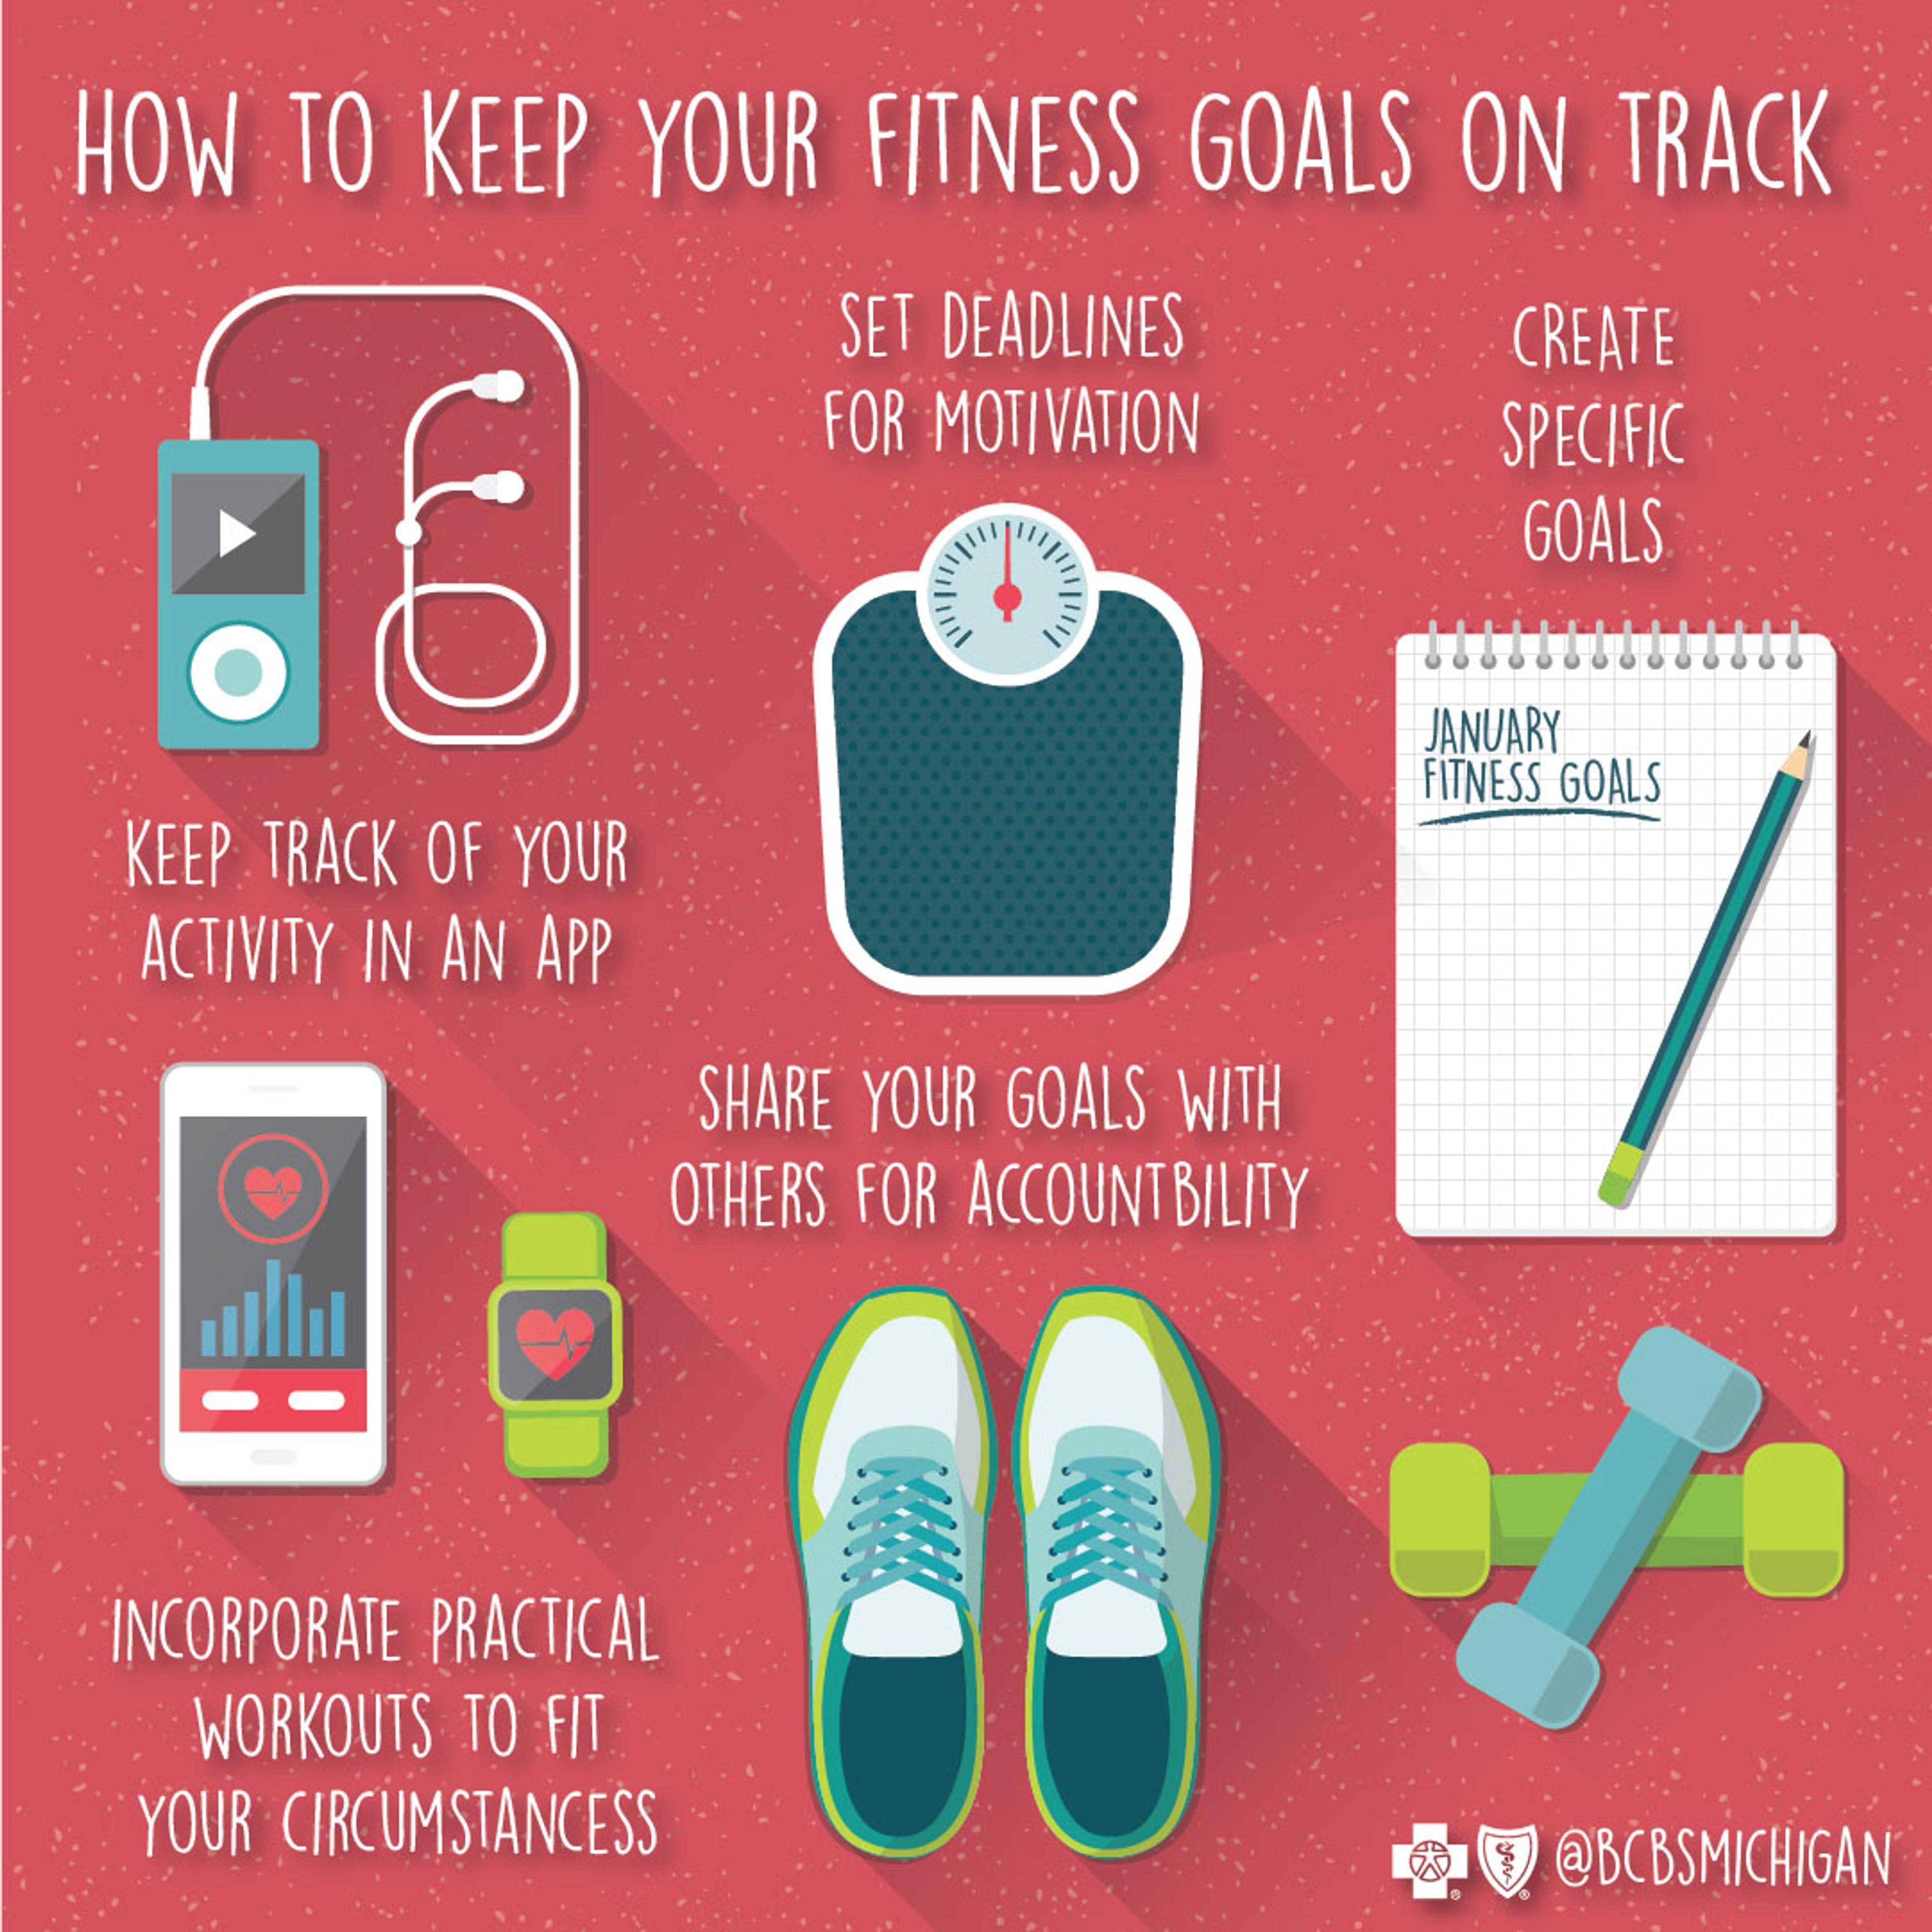 Free workout plans: reach your goals with workouts that fit in your life!